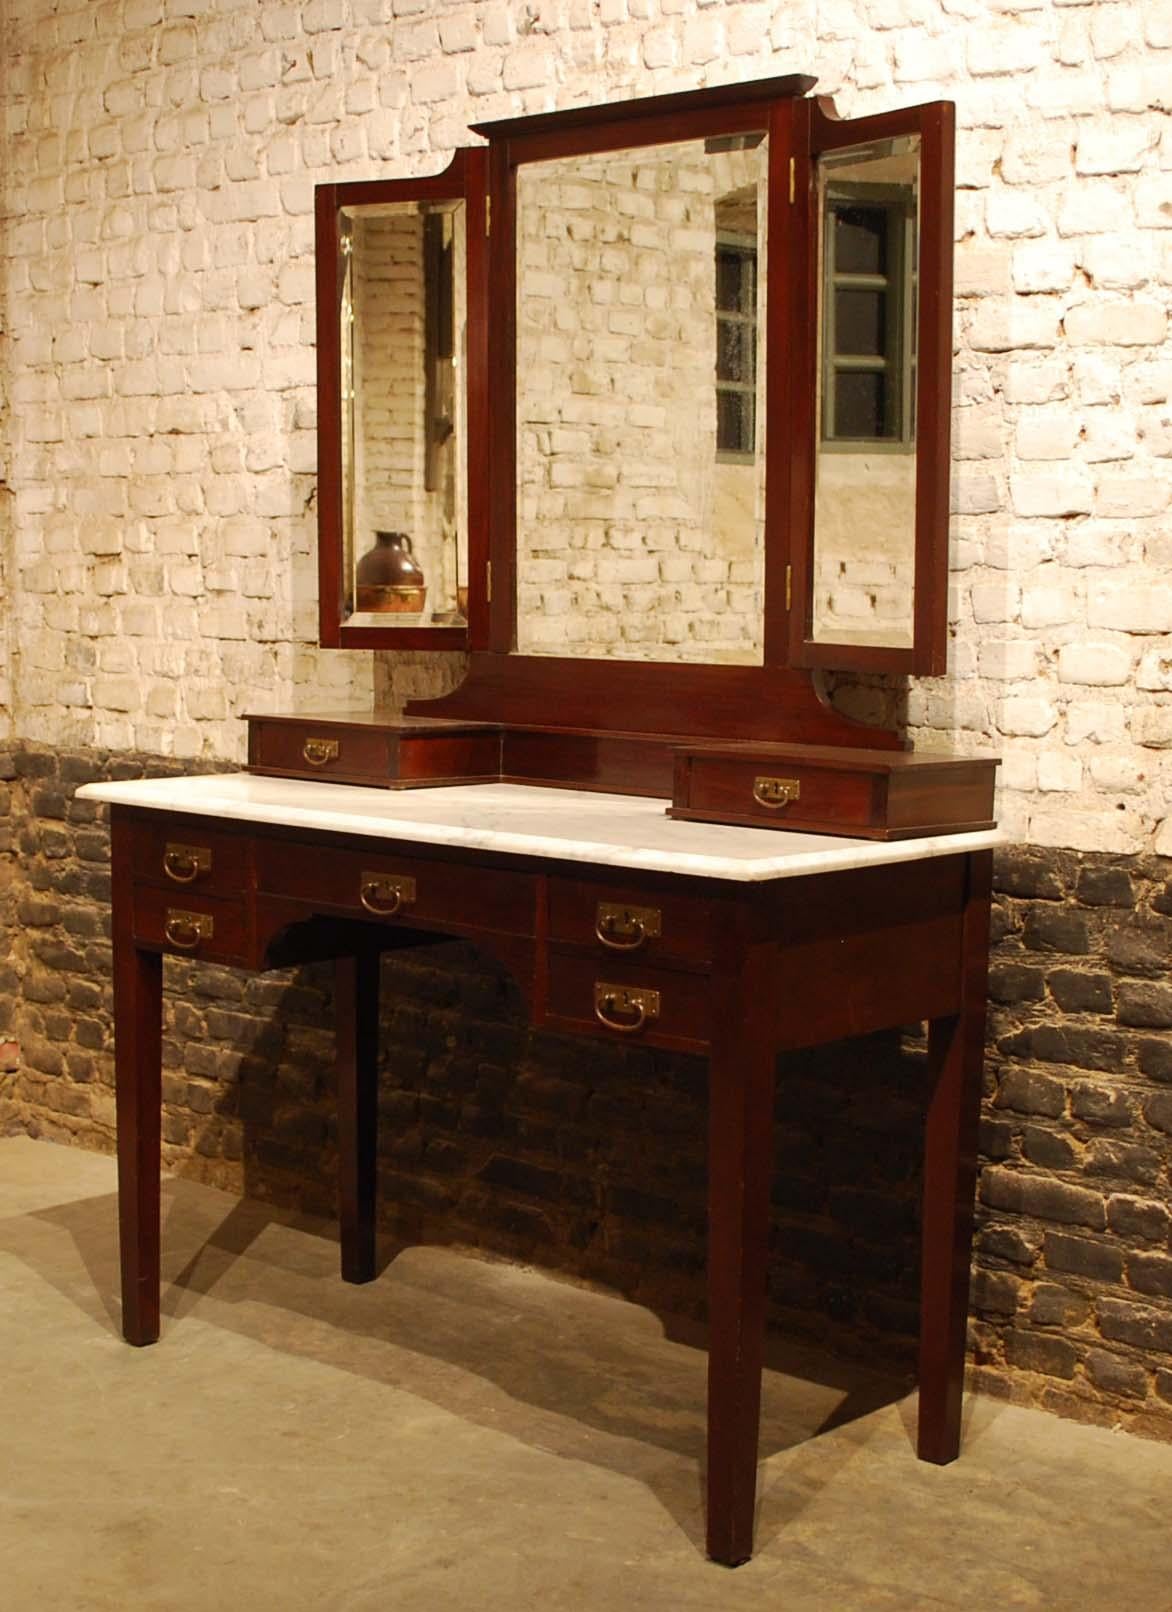 A very elegant dressing table that was made in France in the early 1900s. 
The table has a white Carrara top with a beveled edge. The table base has a central drawer flanked by two drawers on either side. The drawers have a solid oak interior and